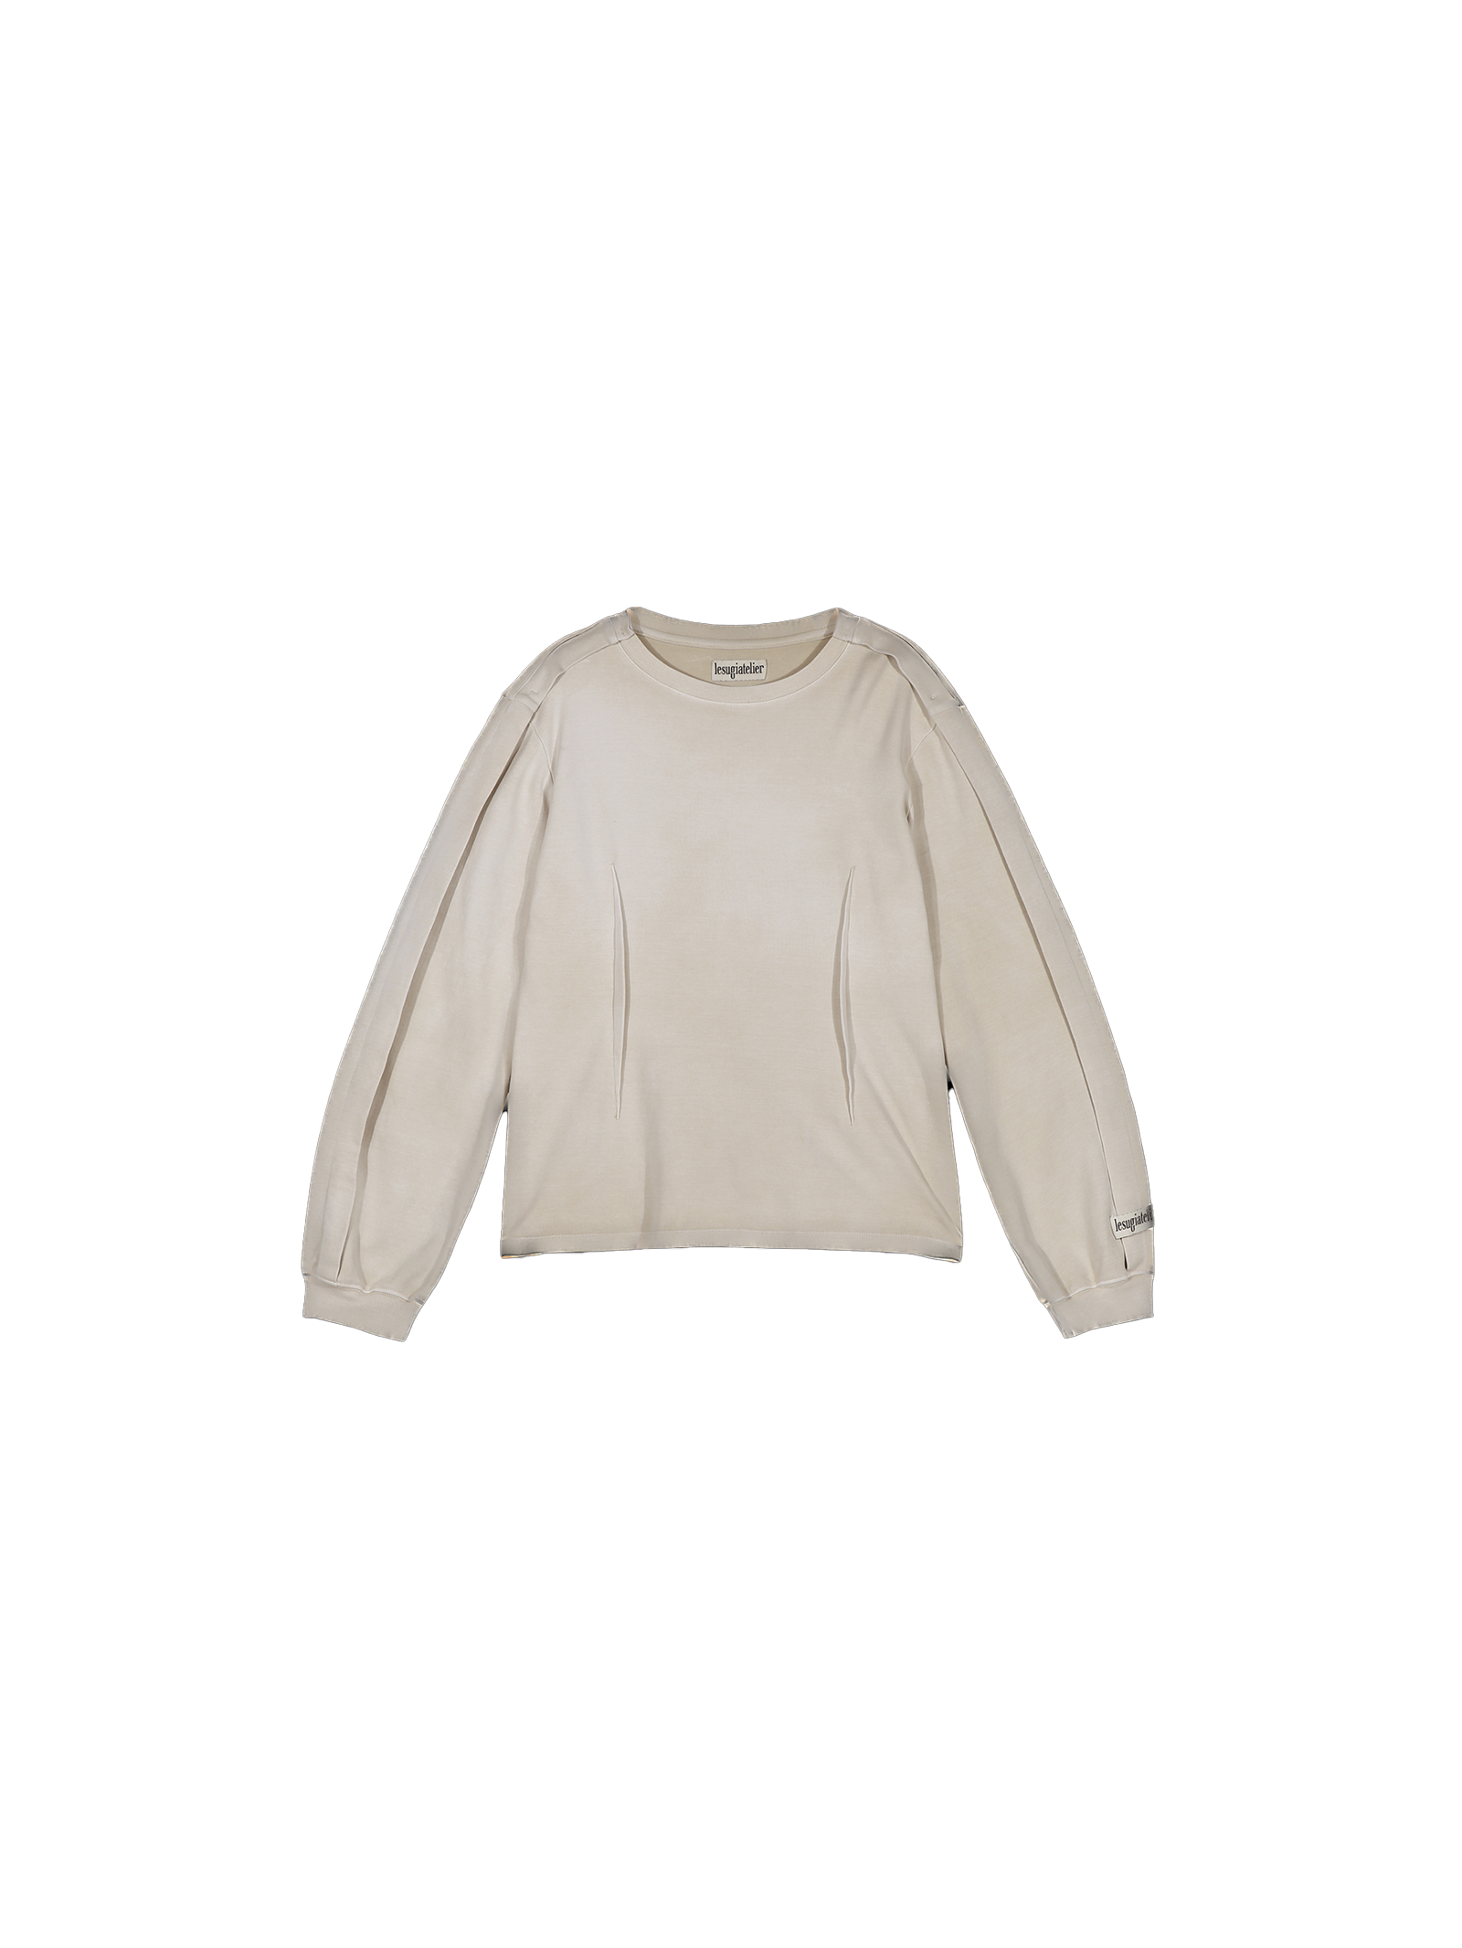 Dying darted long sleeve t-shirt / Beige